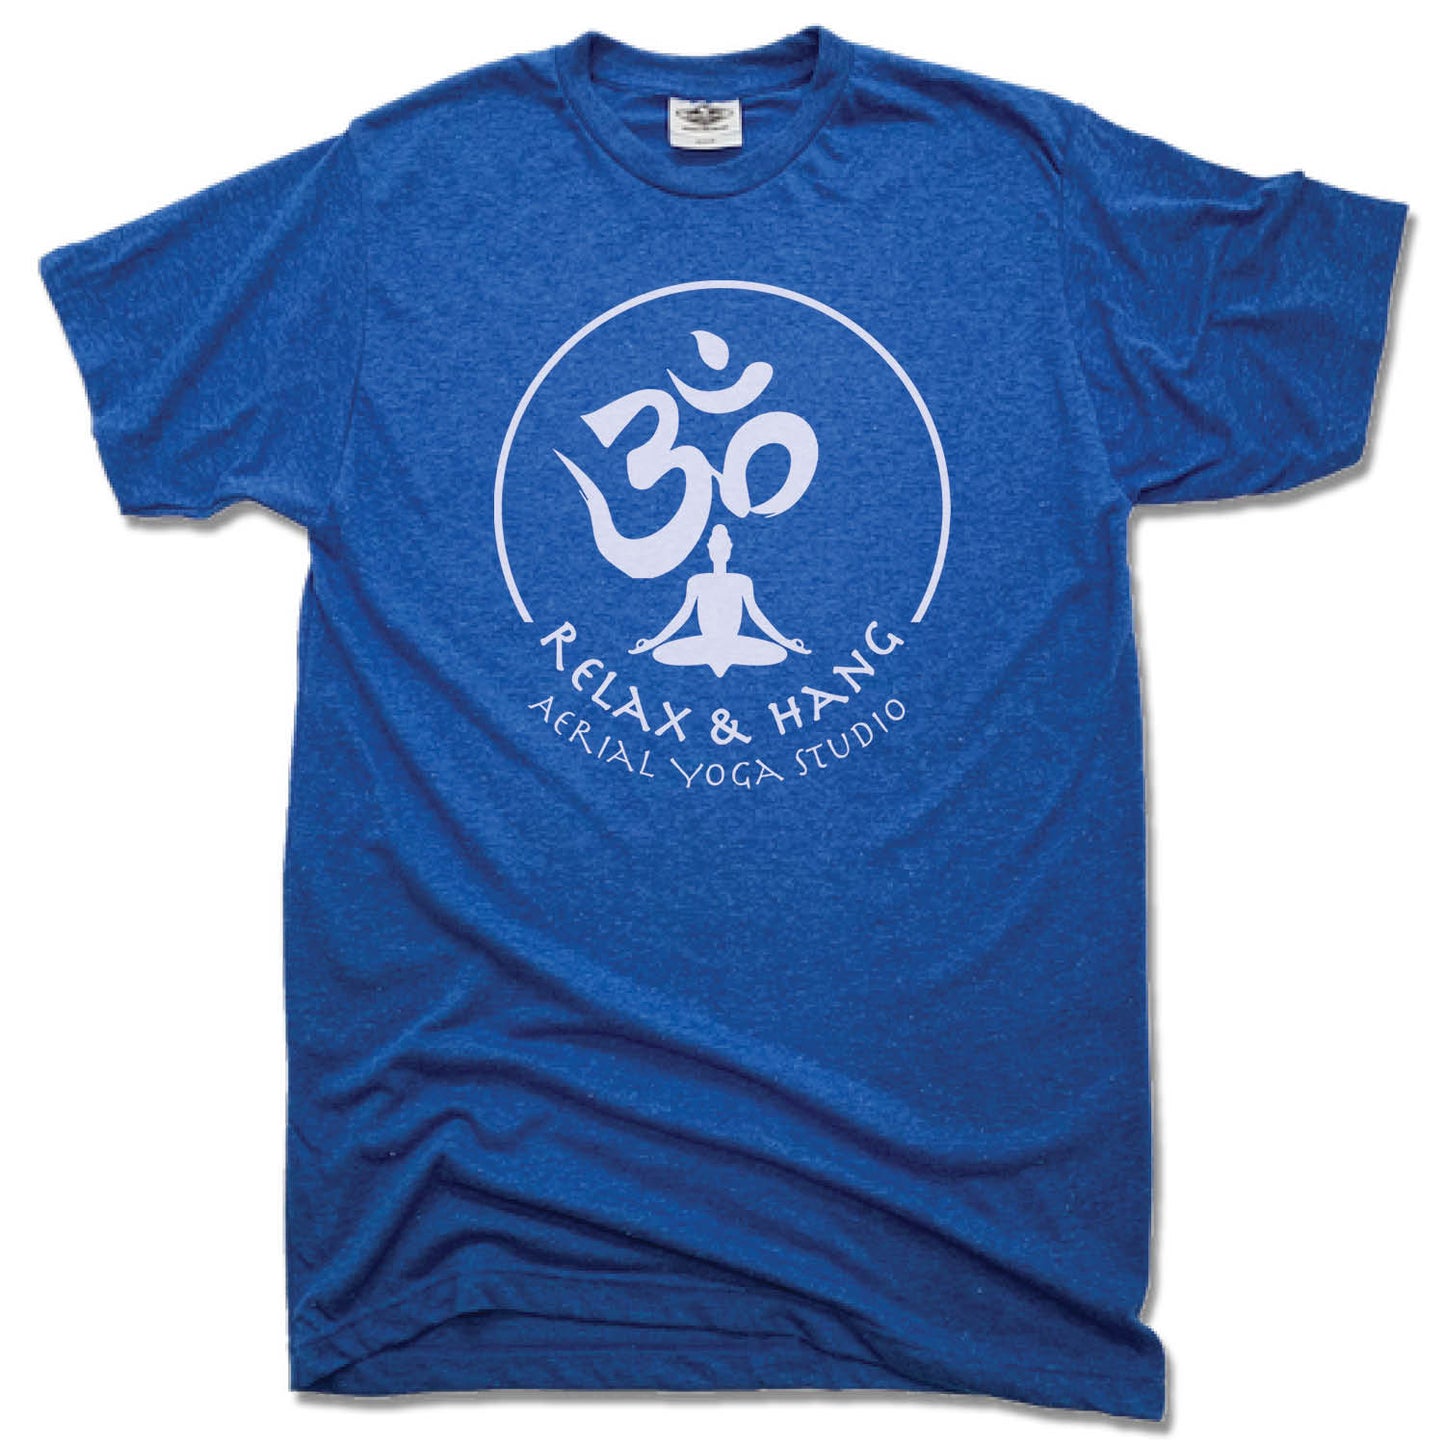 RELAX AND HANG AERIAL YOGA STUDIOS | UNISEX BLUE TEE | WHITE LOGO